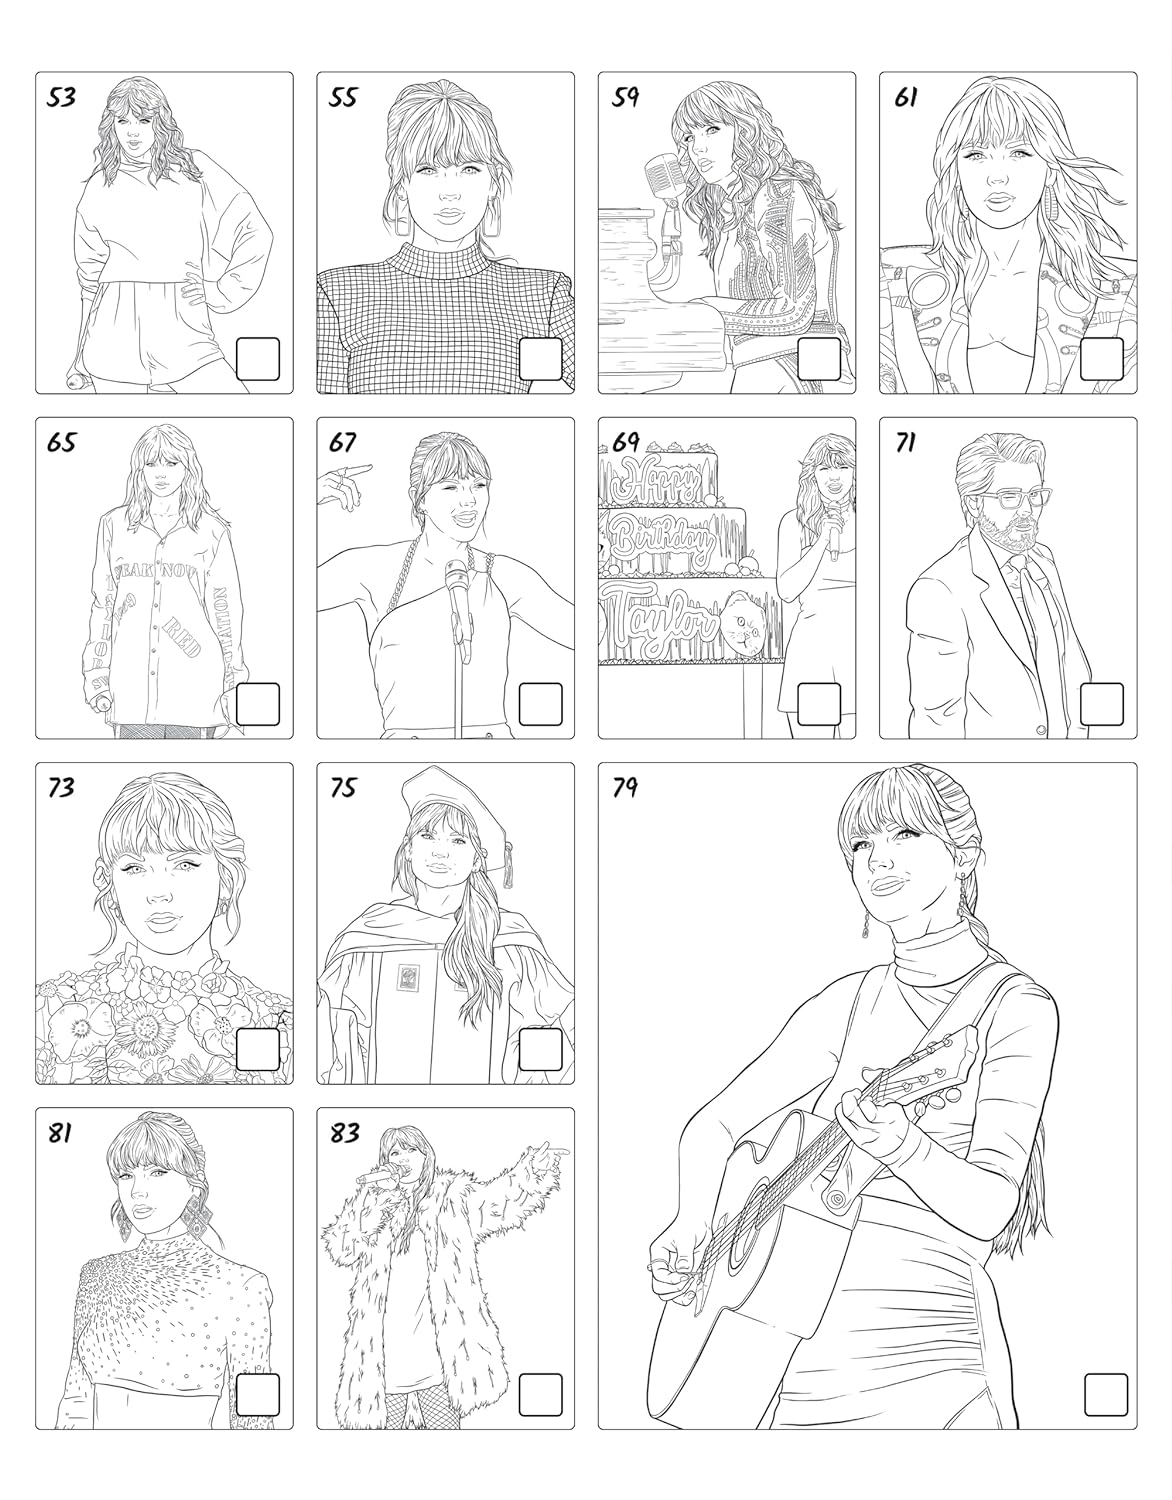 SUPER FAN-tastic Taylor Swift Coloring & Activity Book: 30+ Coloring Pages,  Photo Gallery, Word Searches, Mazes, & Fun Facts (Design Originals) For  Swifties of All Ages - Perforated Pages: Jessica Kendall: 9781497206861